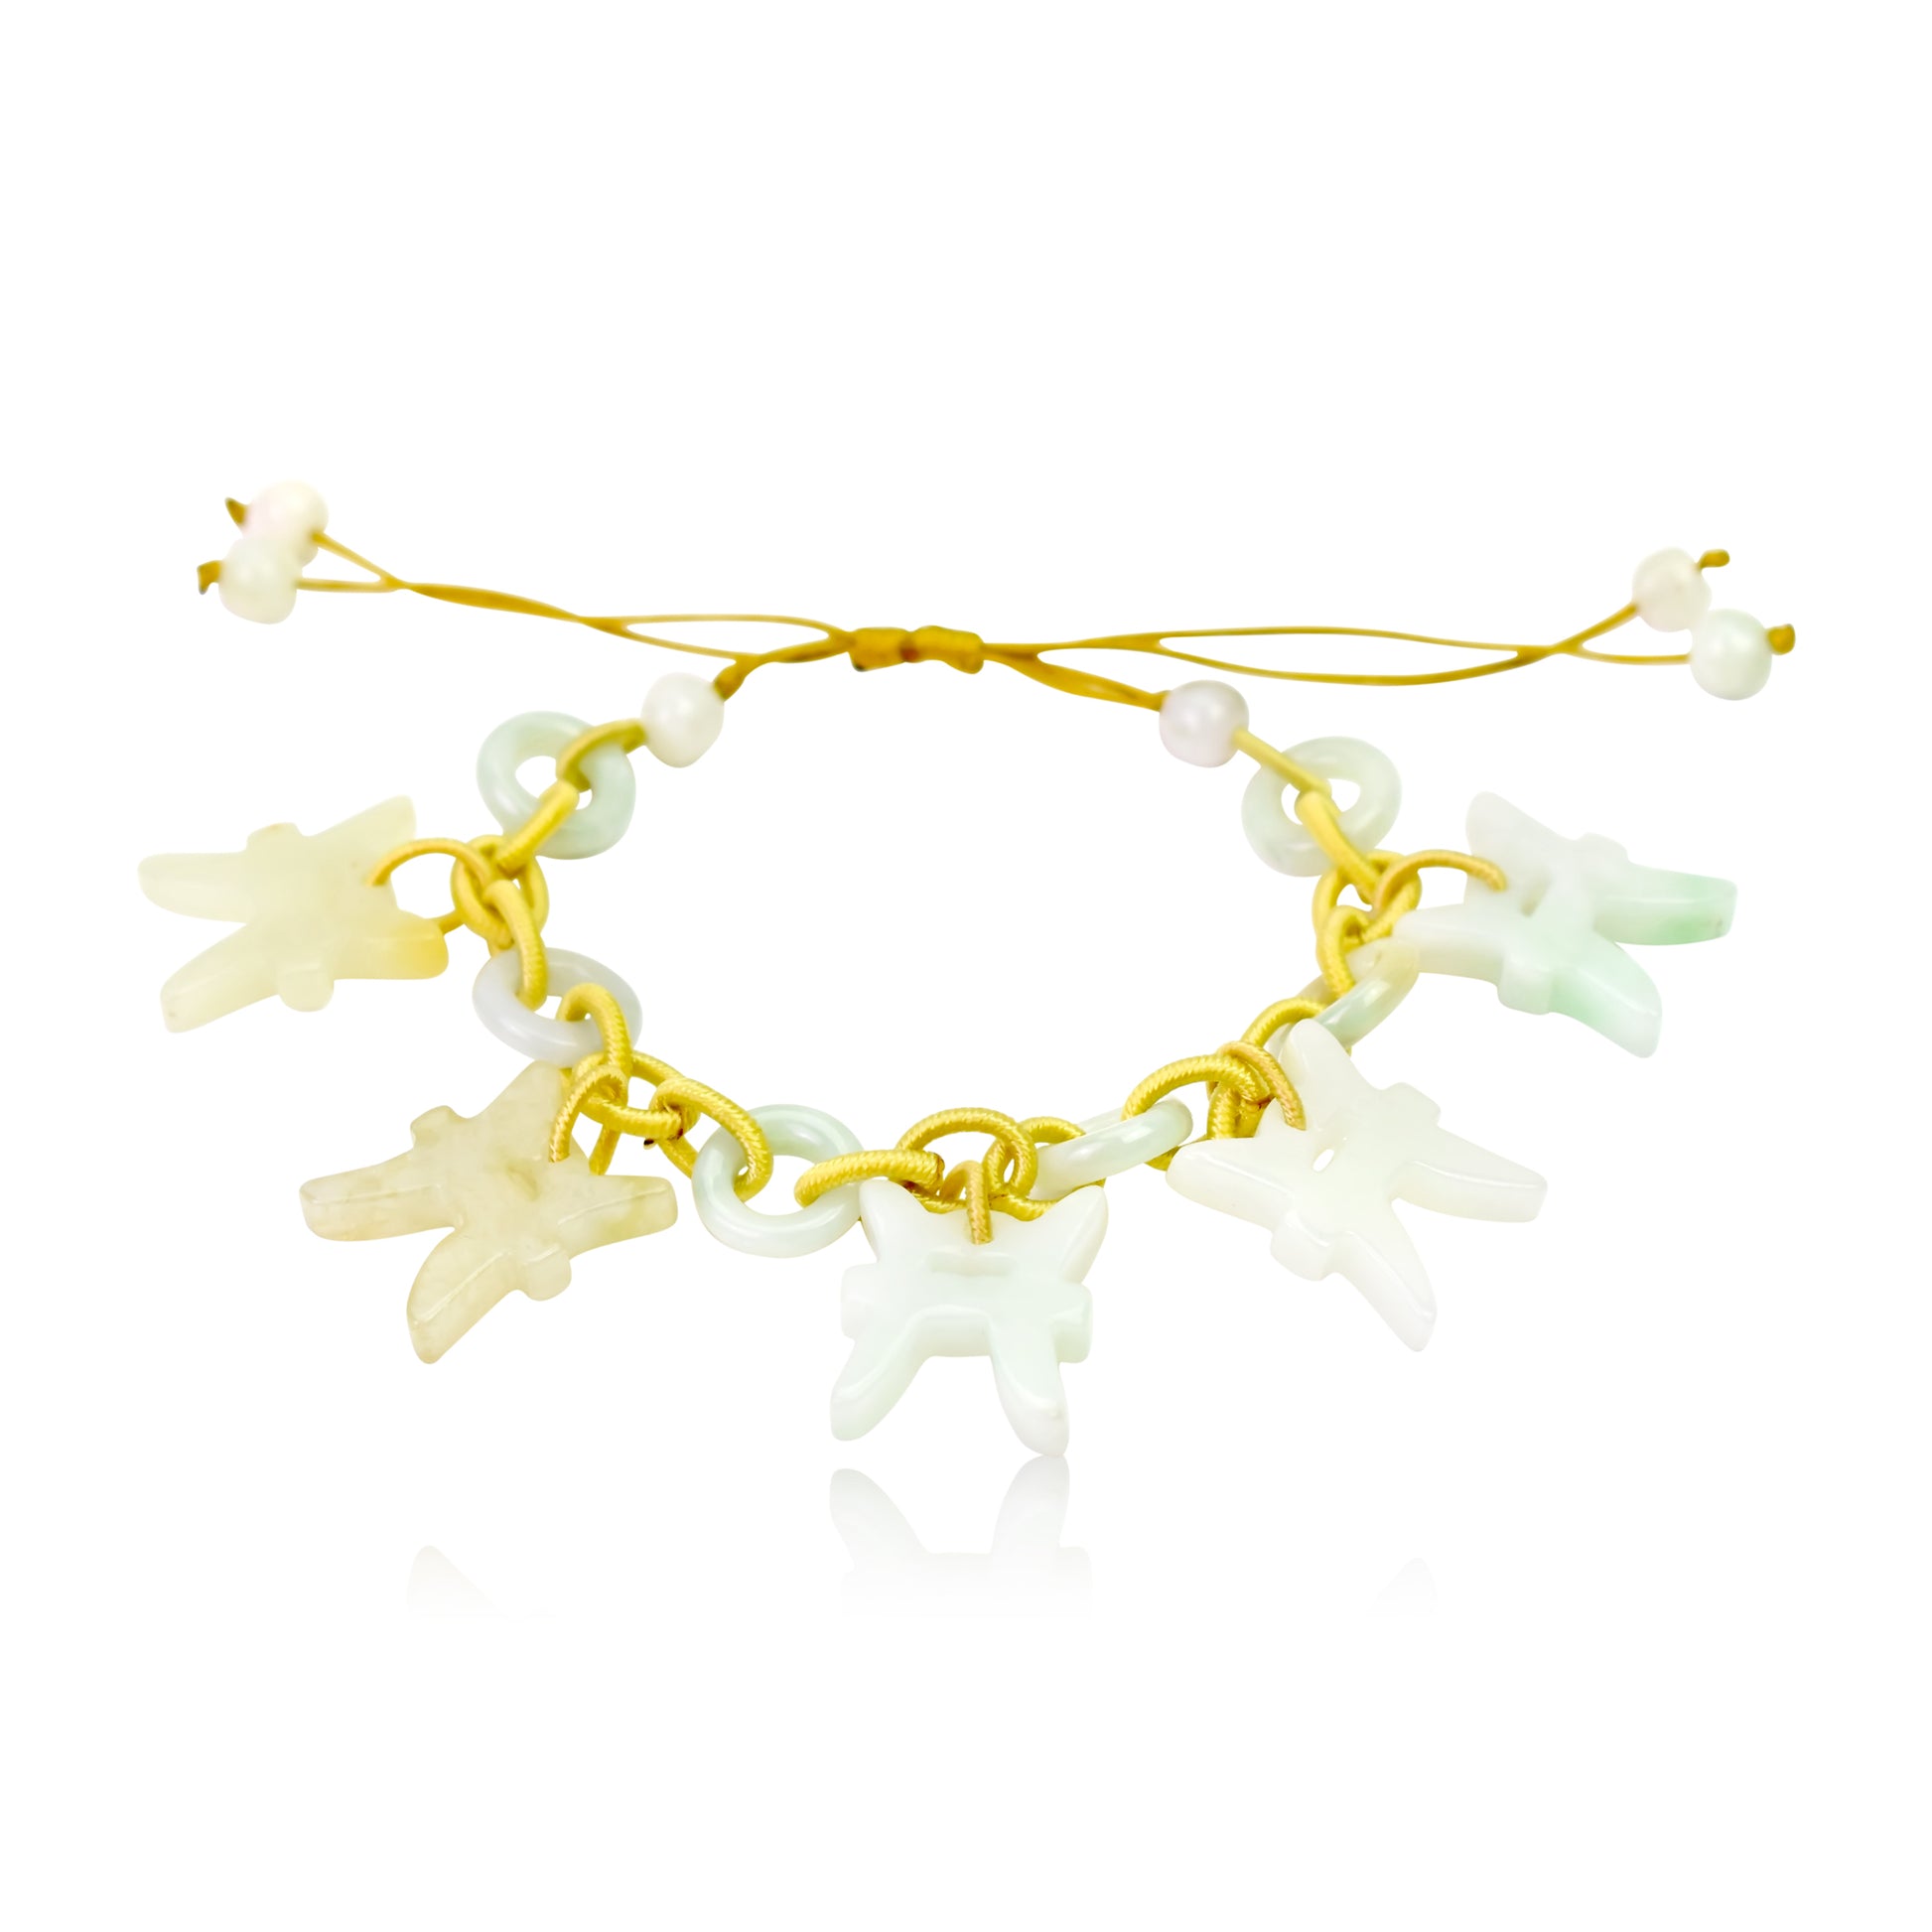 Discover the Magic of the Pisces with Our Adjustable Charm Bracelet made with Yellow Cord